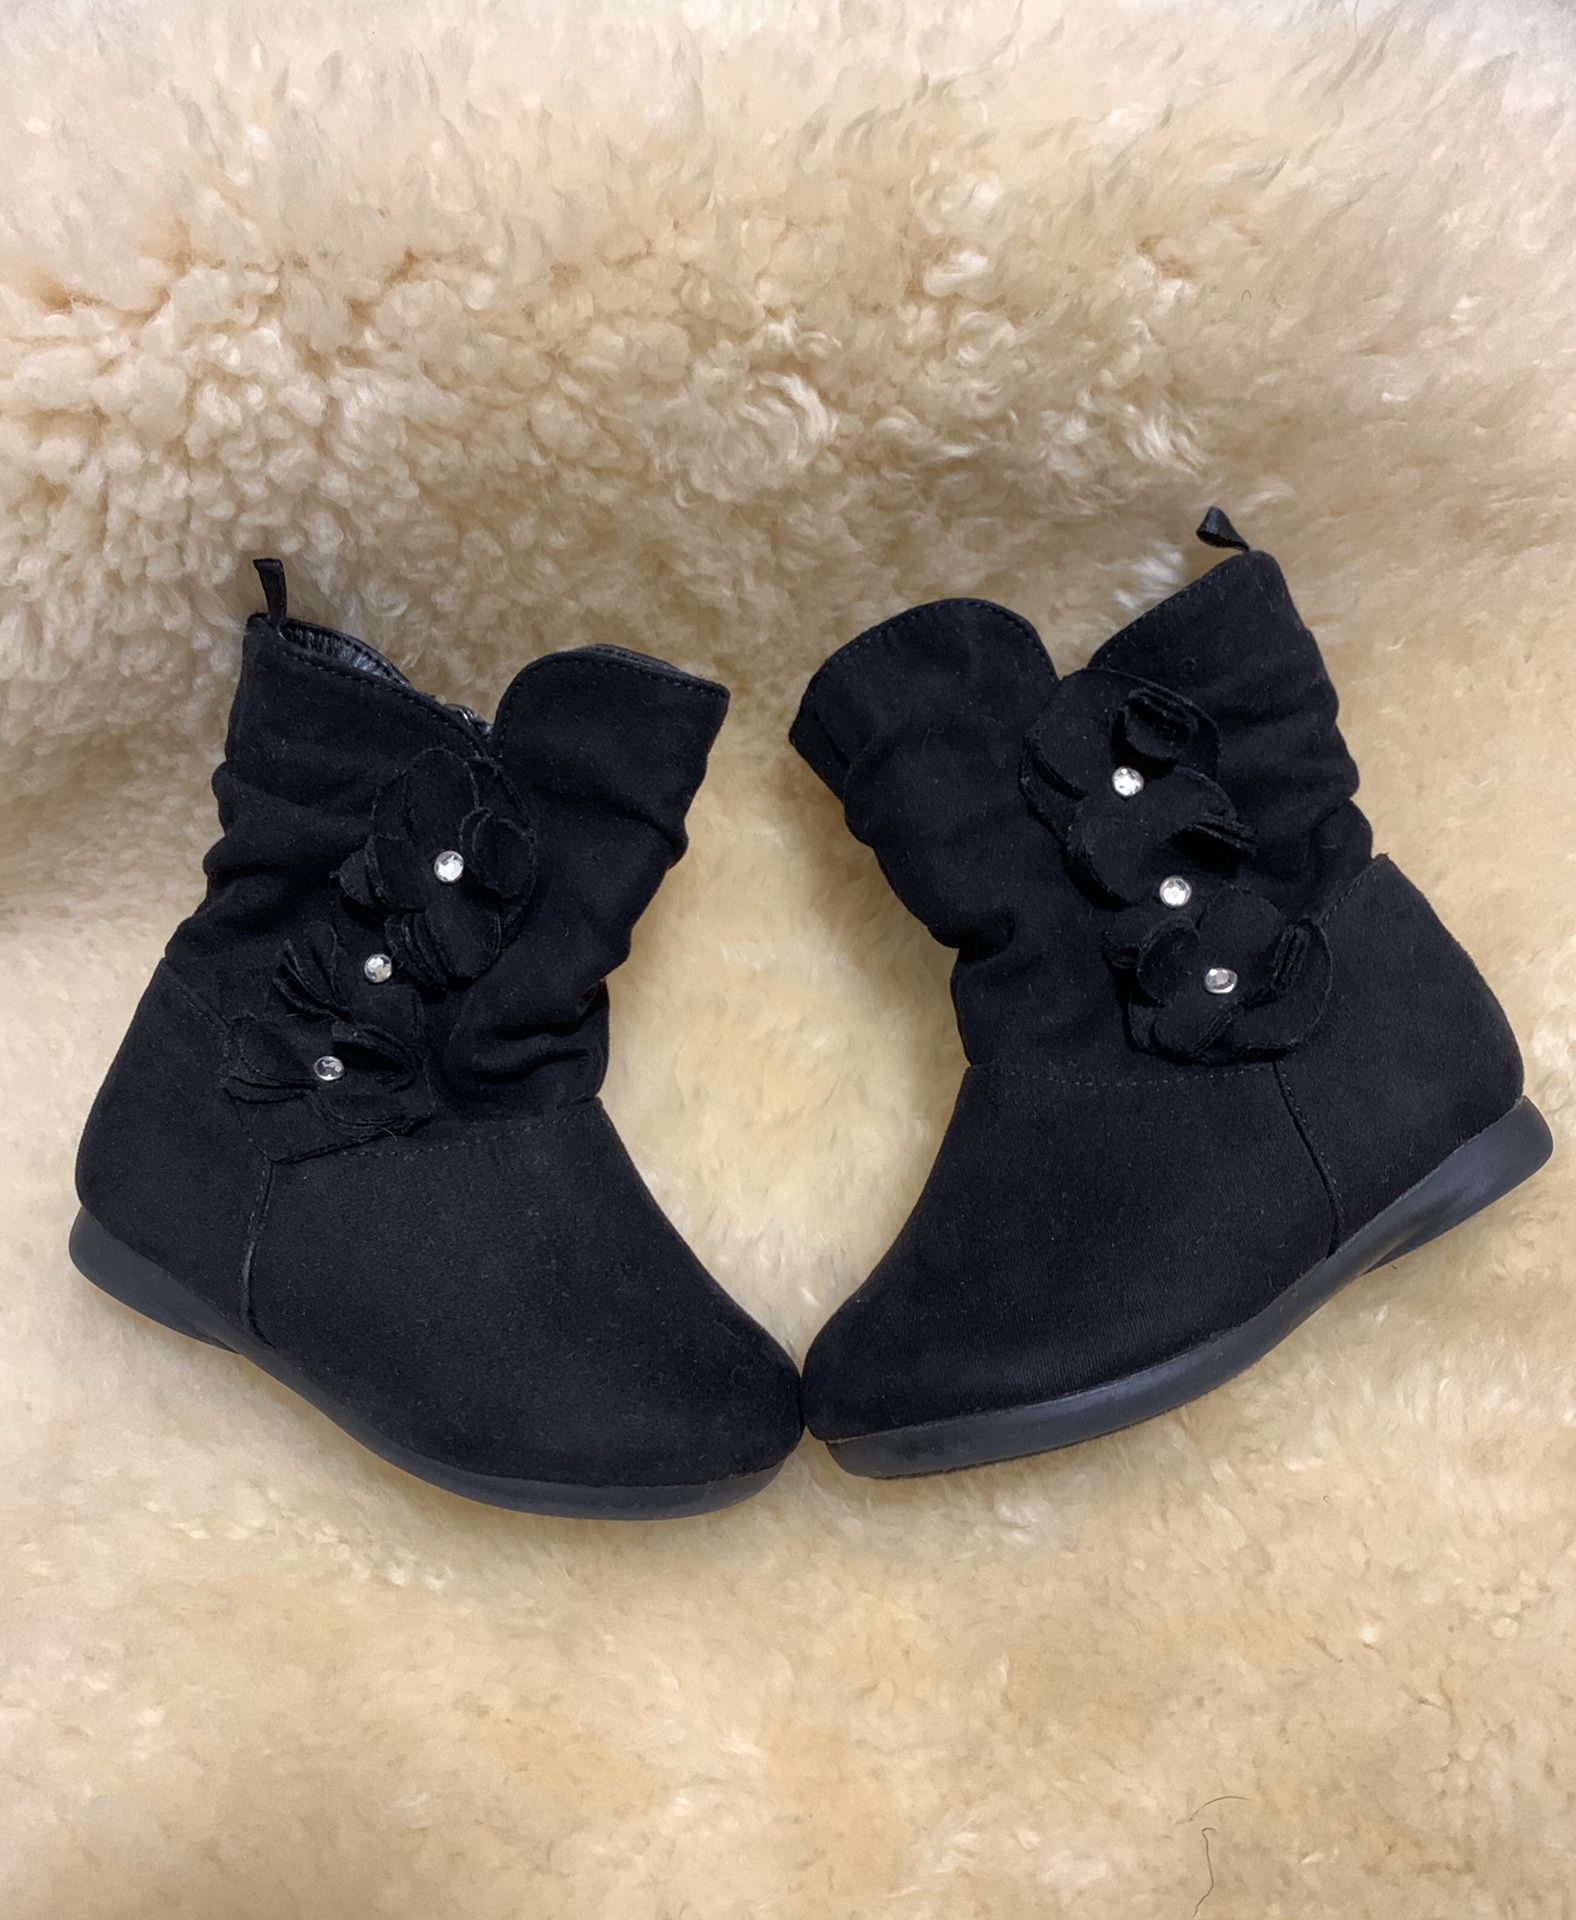 Healthtex baby girl boots size 5